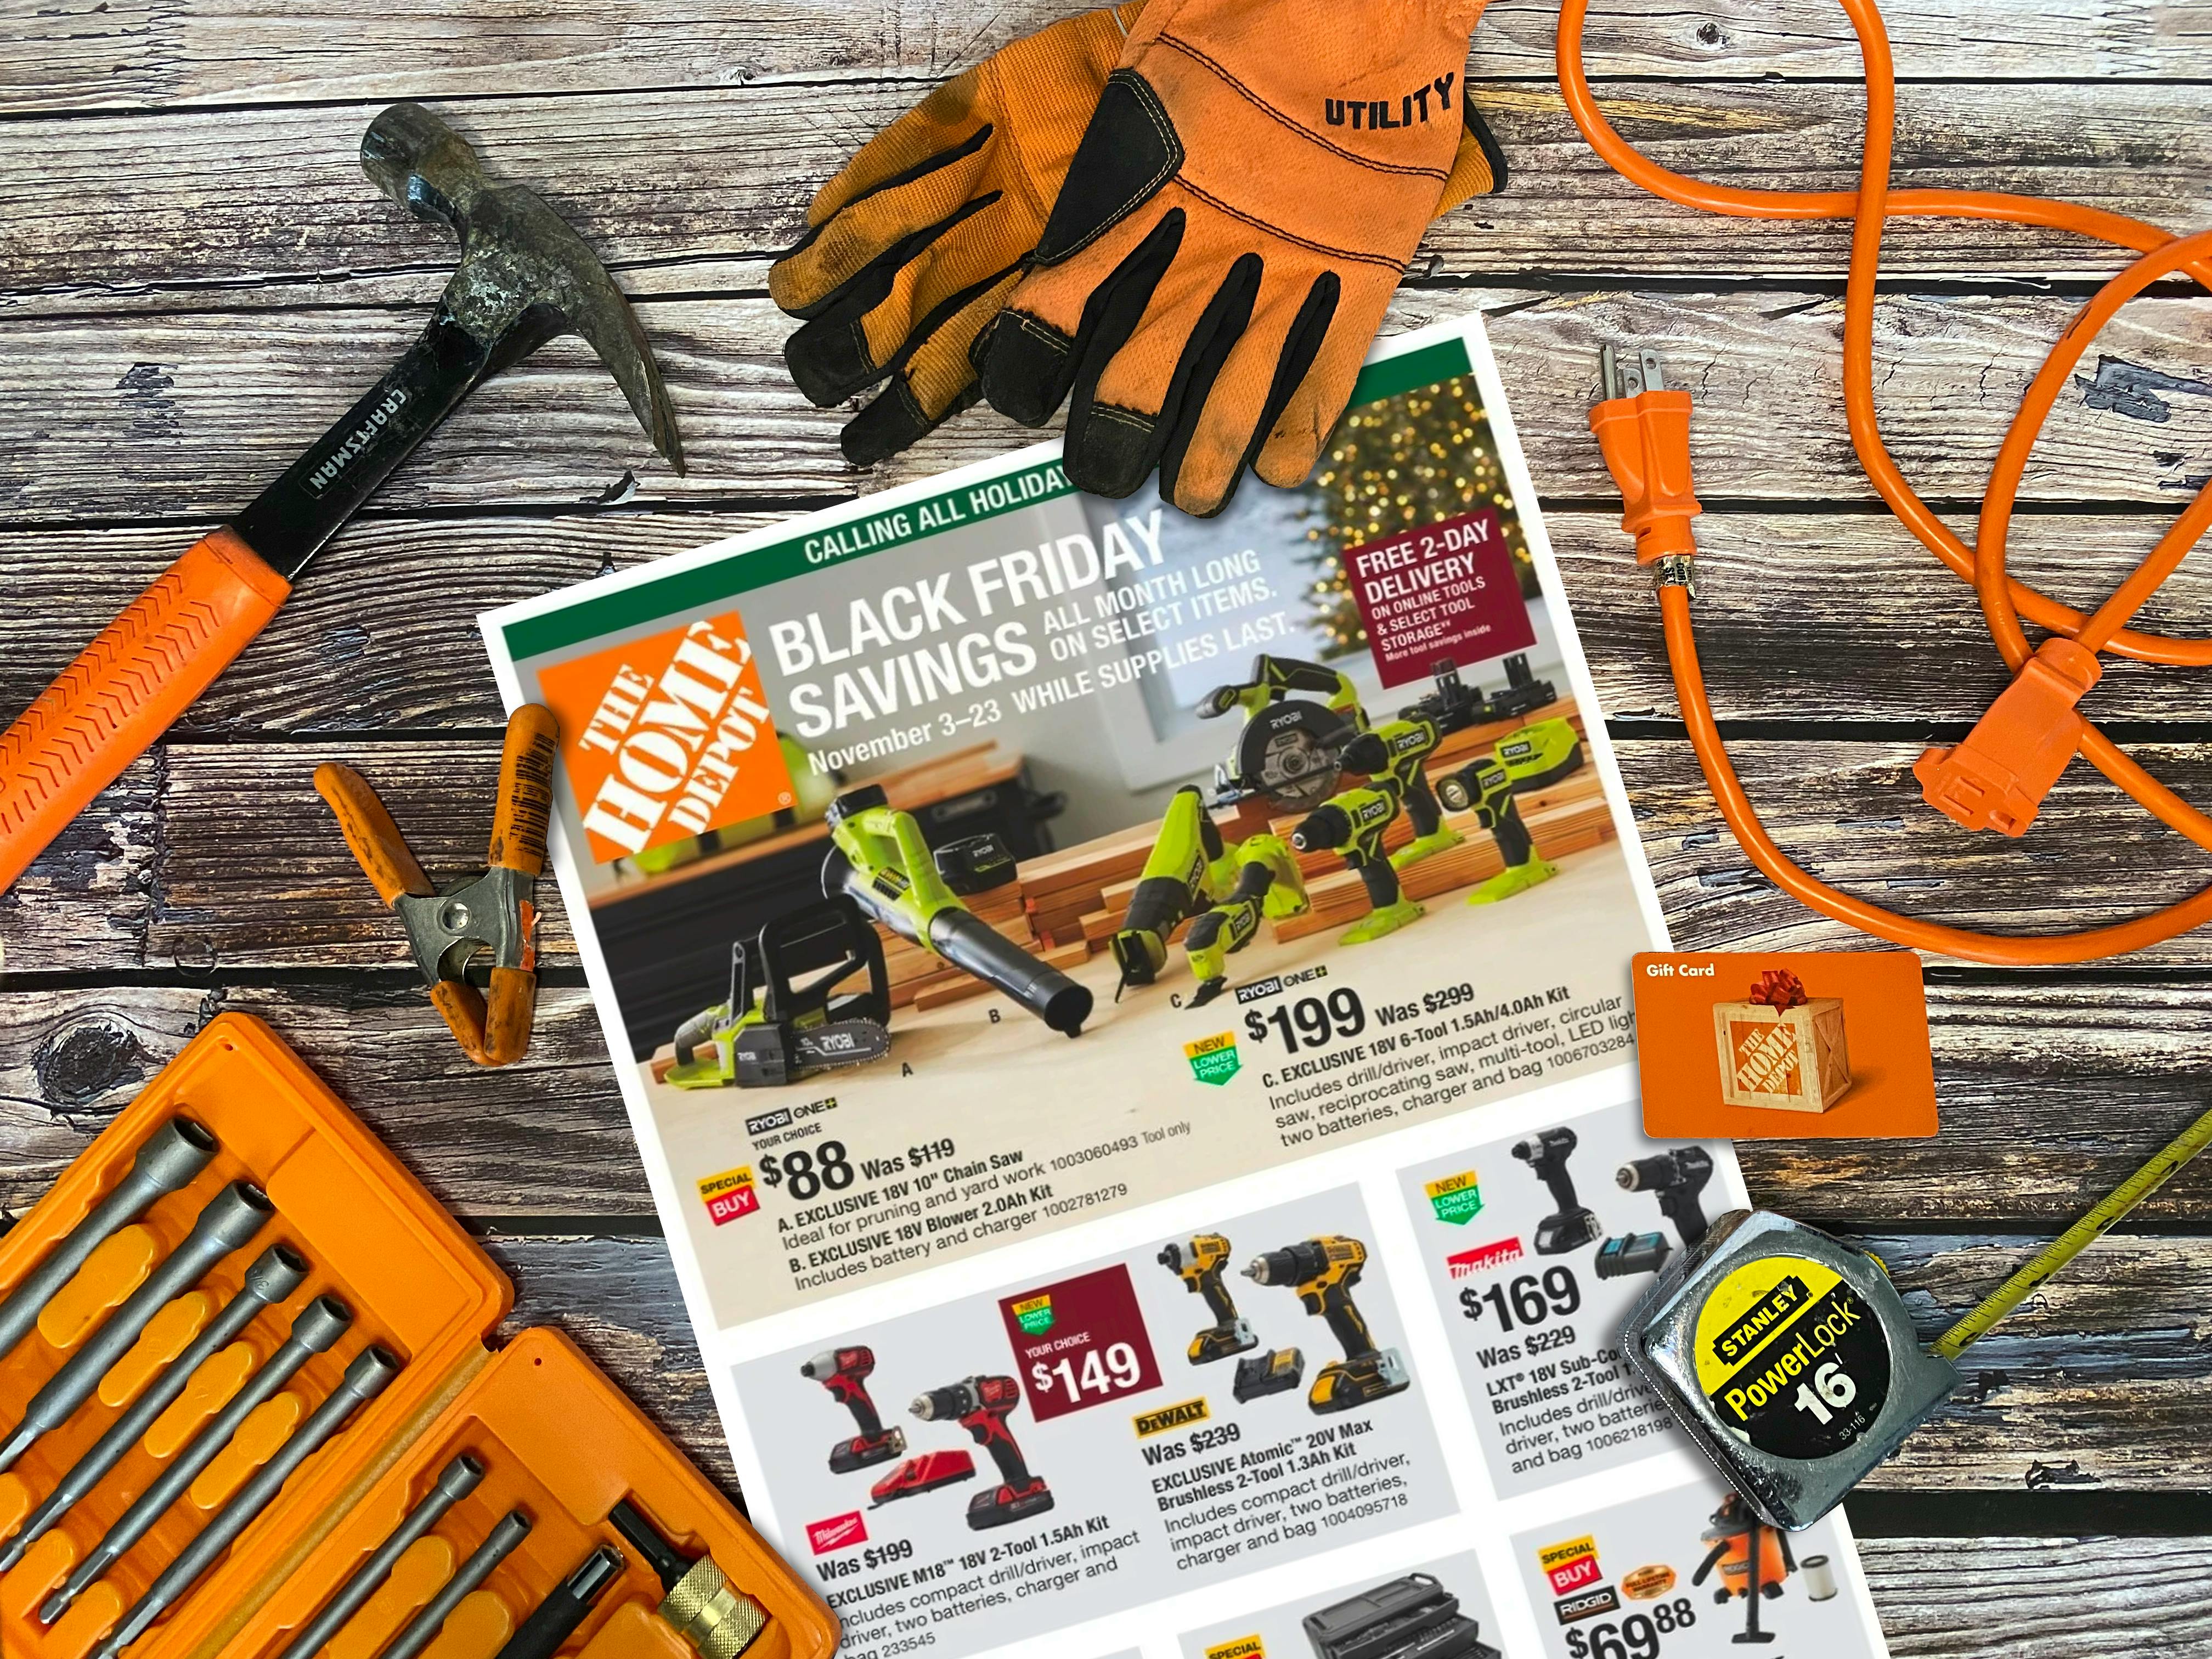 A Home Depot Black Friday savings advertisement on a table with some tools